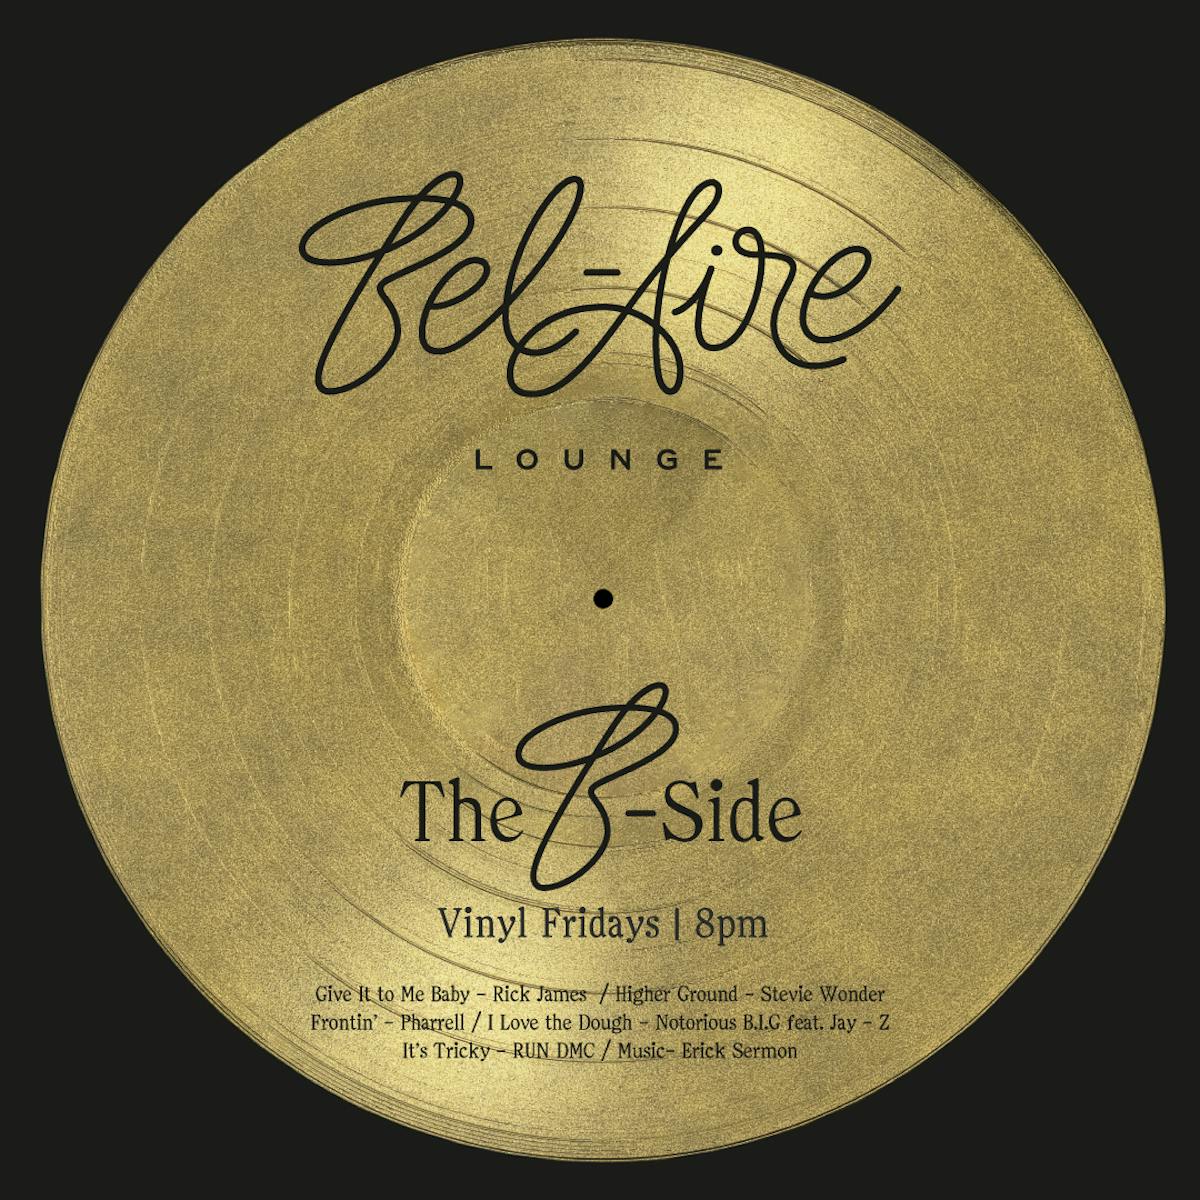 Logo for the B-Side event which occurs every Friday night at Bel-Aire, a Las Vegas bar.